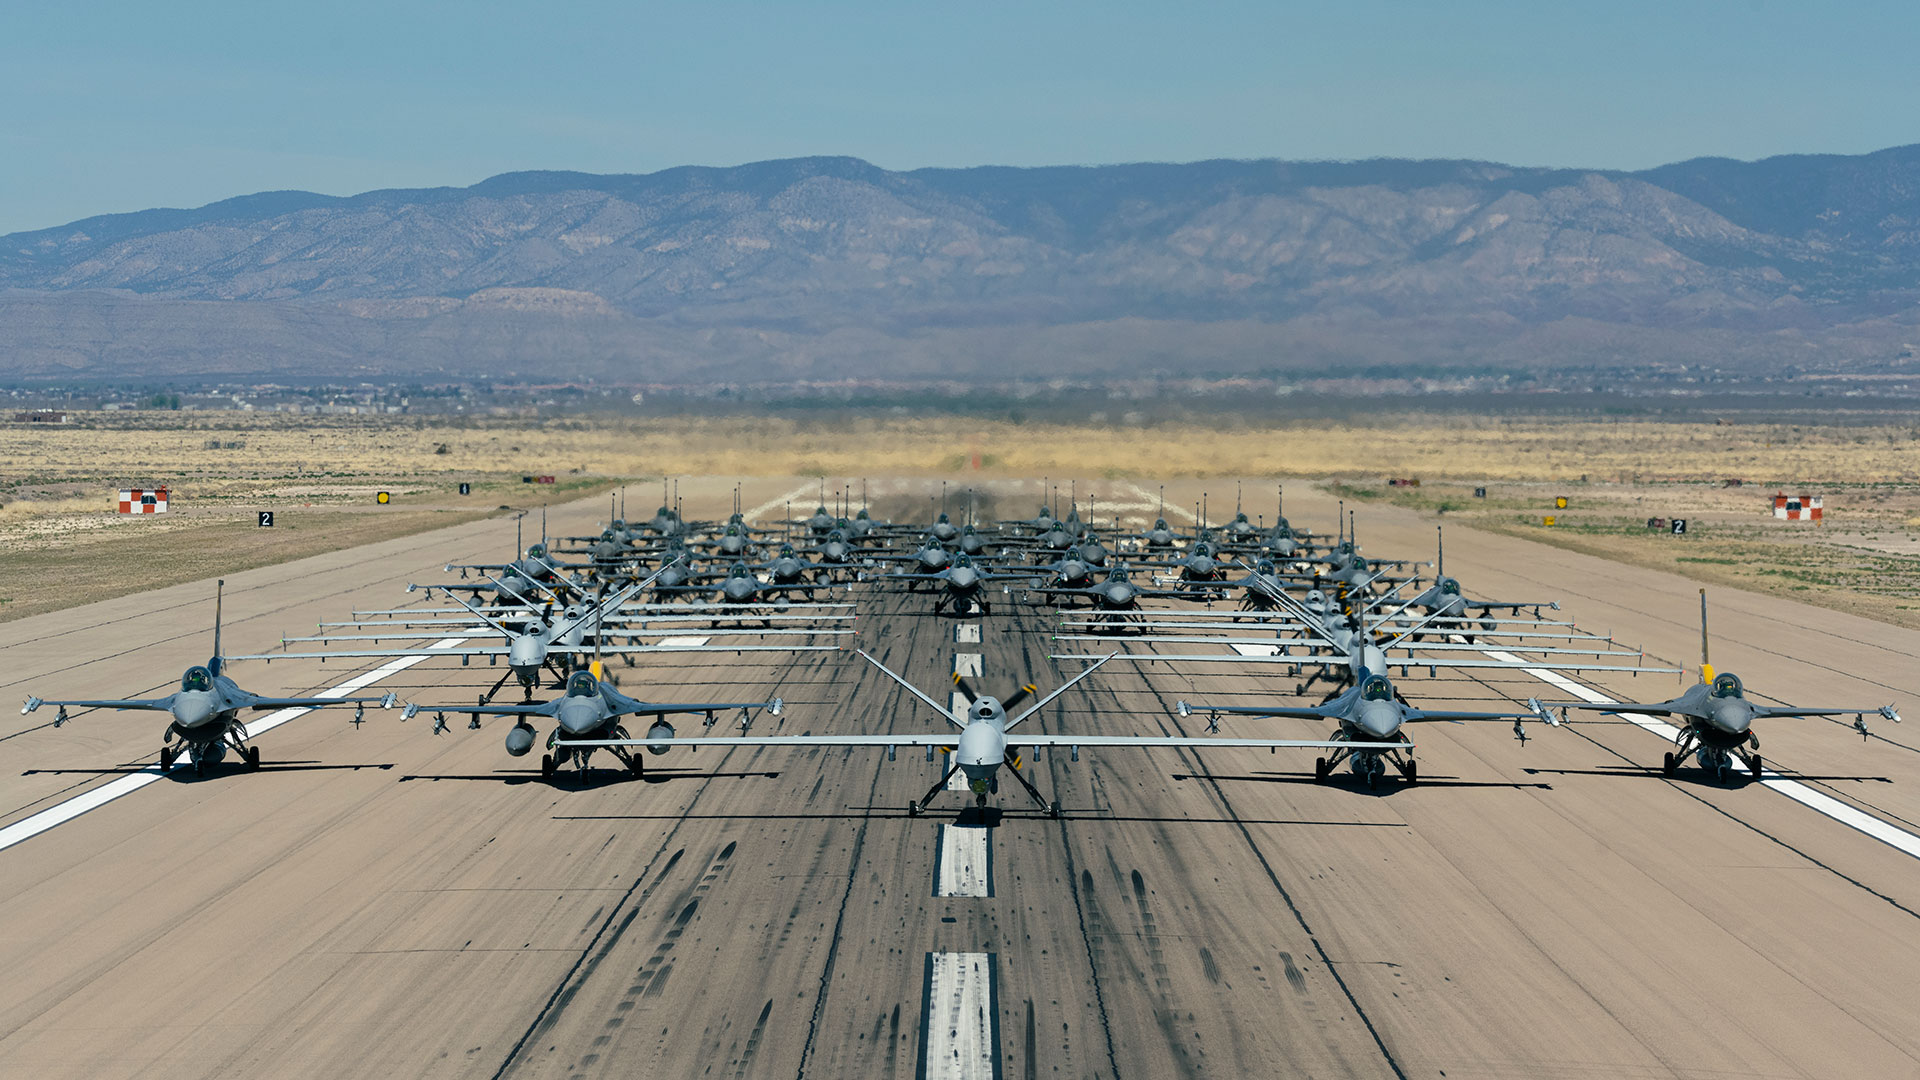 F-16s and MQ-9s assigned to the 49th Wing lined the runway at Holloman AFB, creating an incredible display of airpower. USAF photo by Senior Airman Antonia Salfran